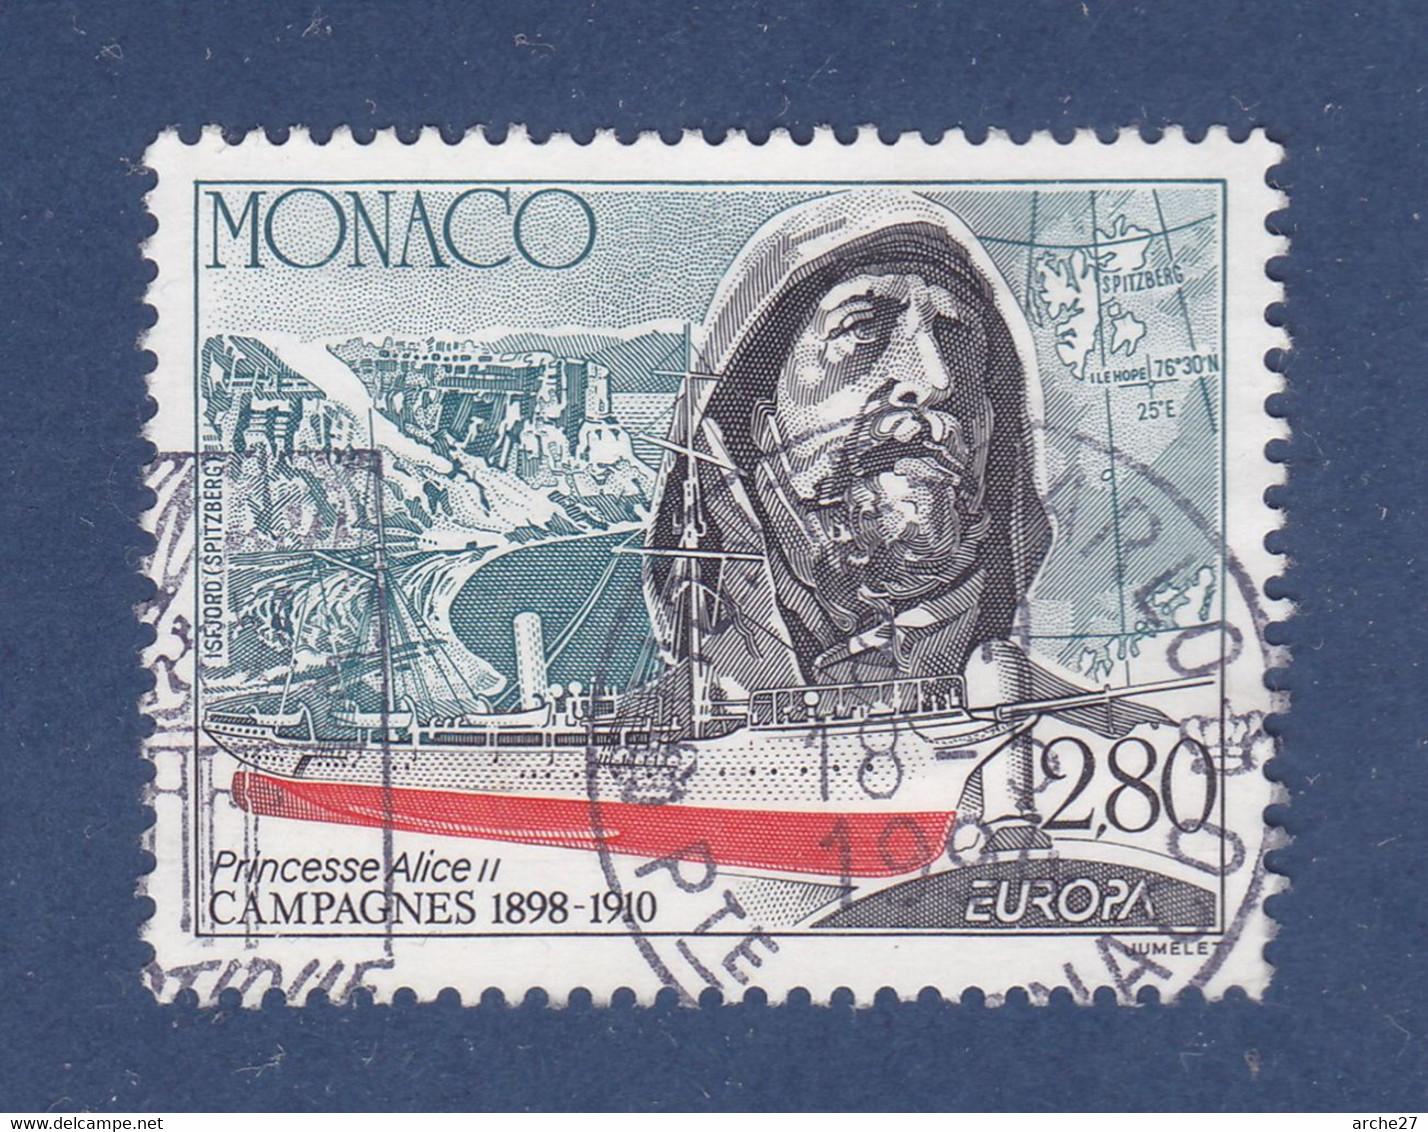 TIMBRE MONACO N° 1935 OBLITERE - Used Stamps